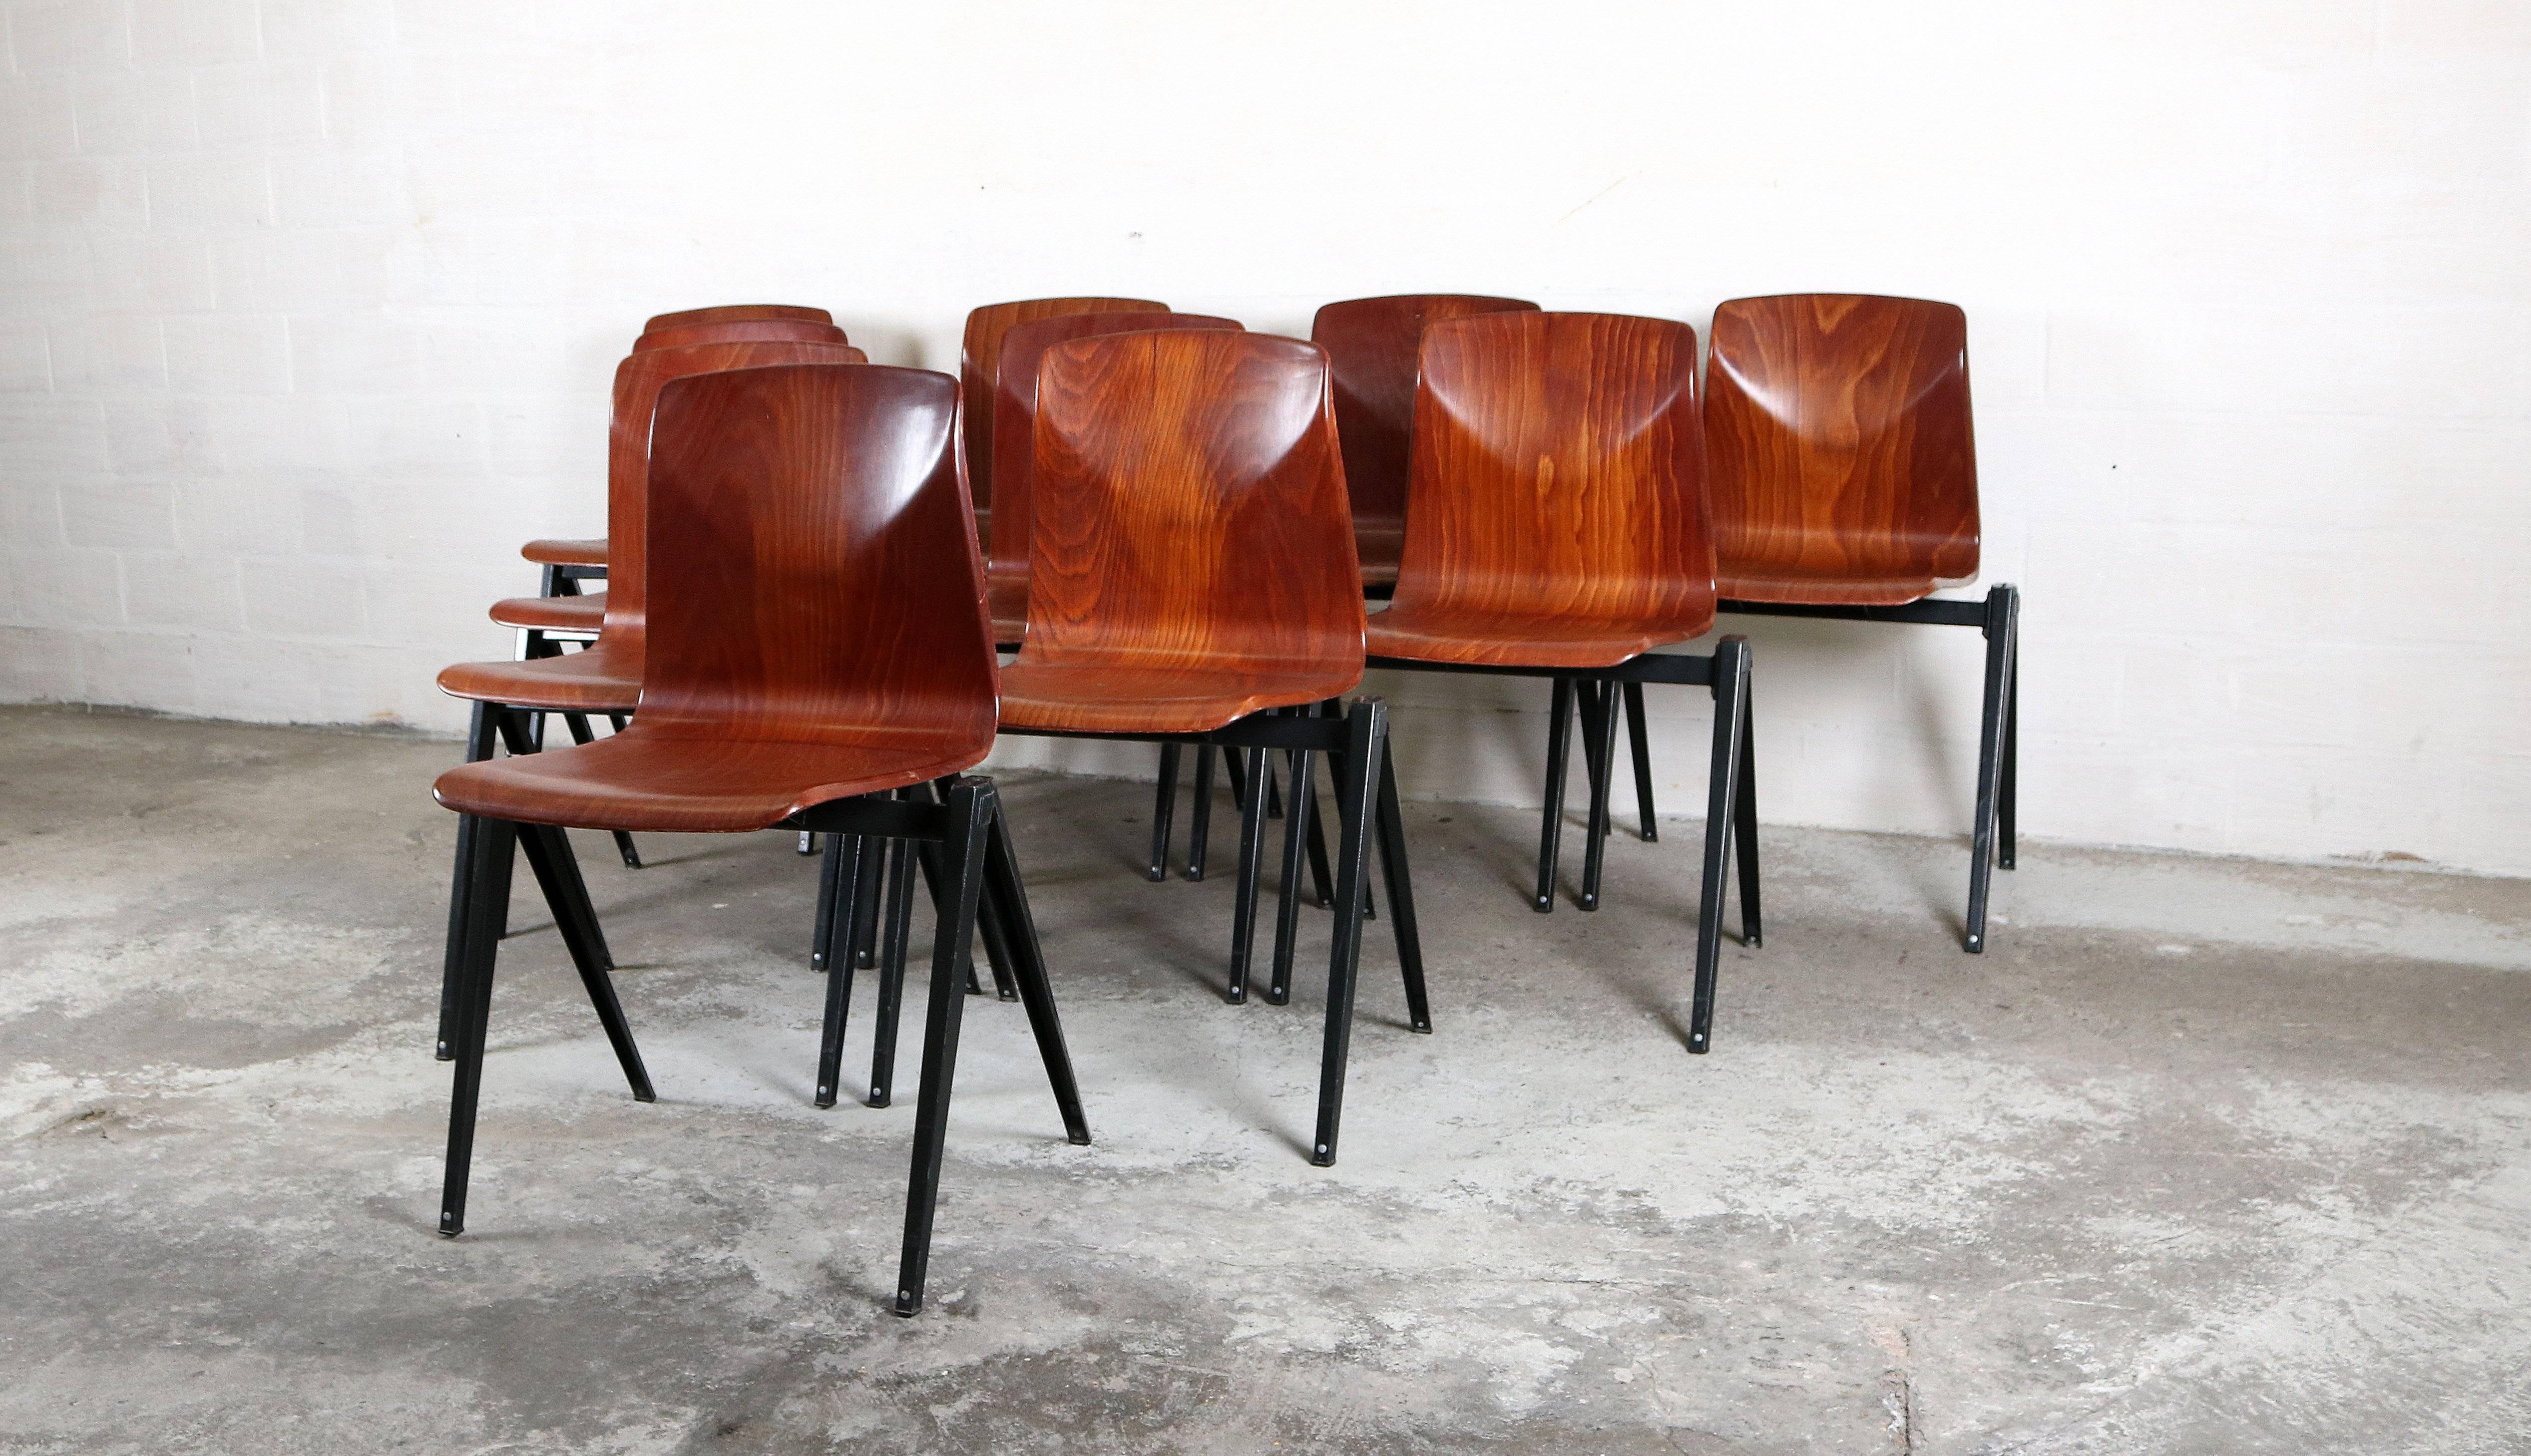 Ten Pagholz chairs in a very good condition.
The plywood seats of the chairs are made of rosewood.
The frame is dark grey metal.